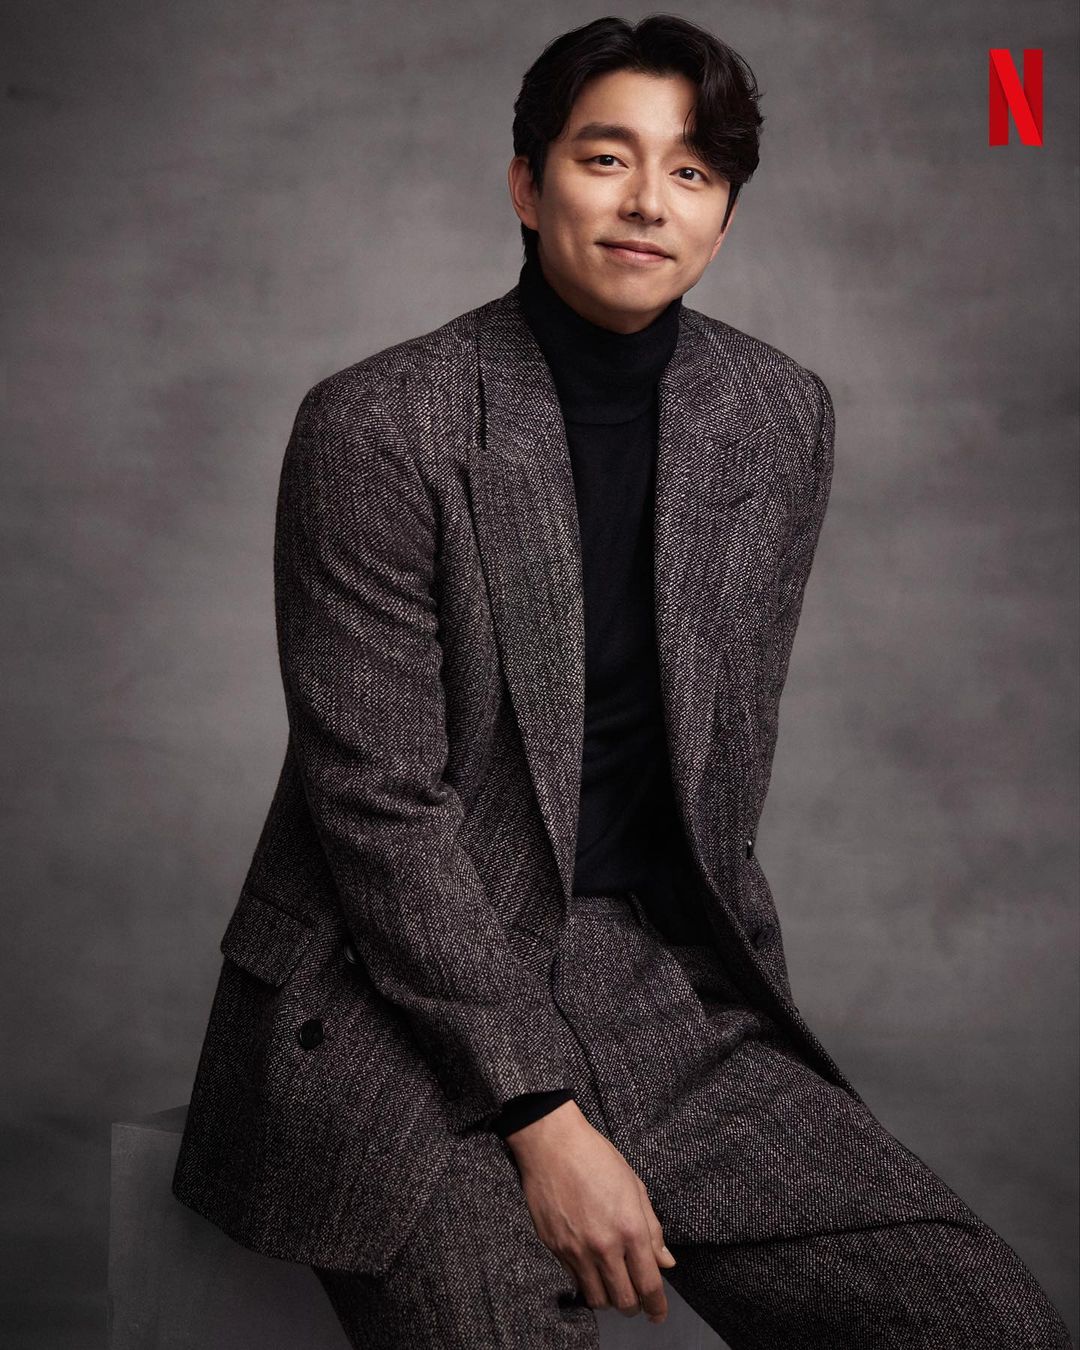 Gong Yoo during a promotional photoshoot for Netflix's "Squid Game'